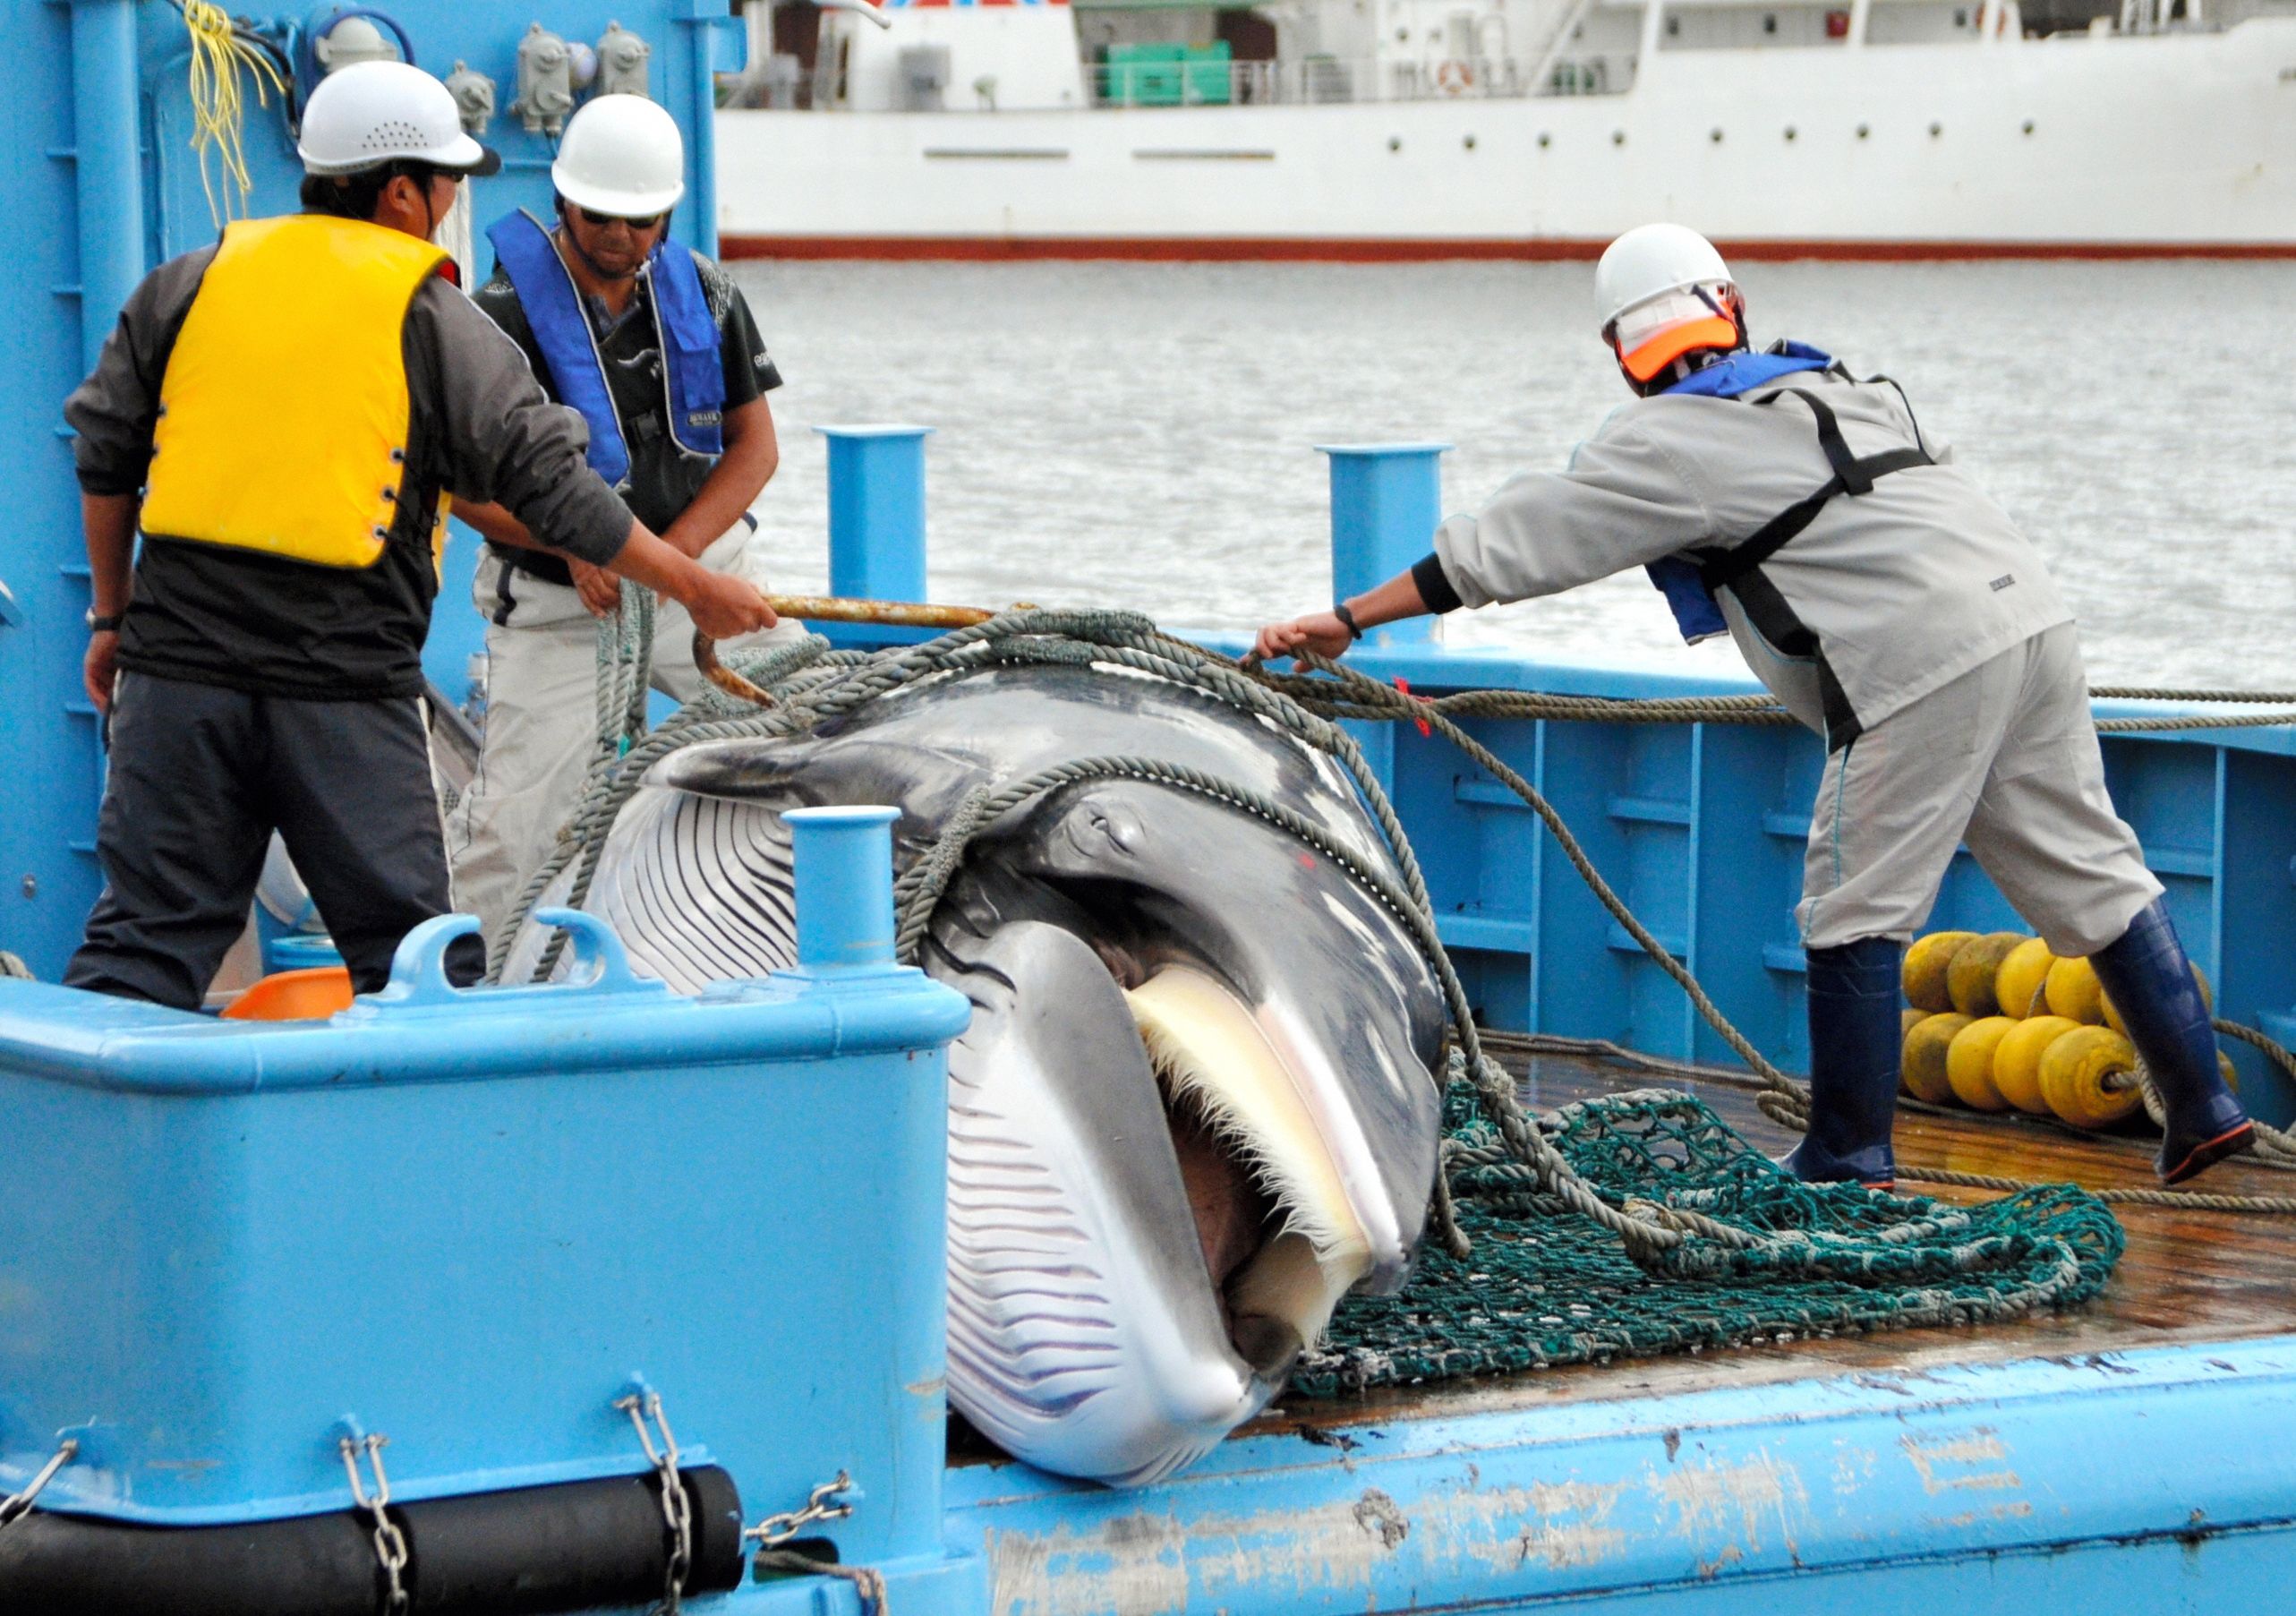 Sea Shepherd battle with Japanese whaling ships ends with a whimper